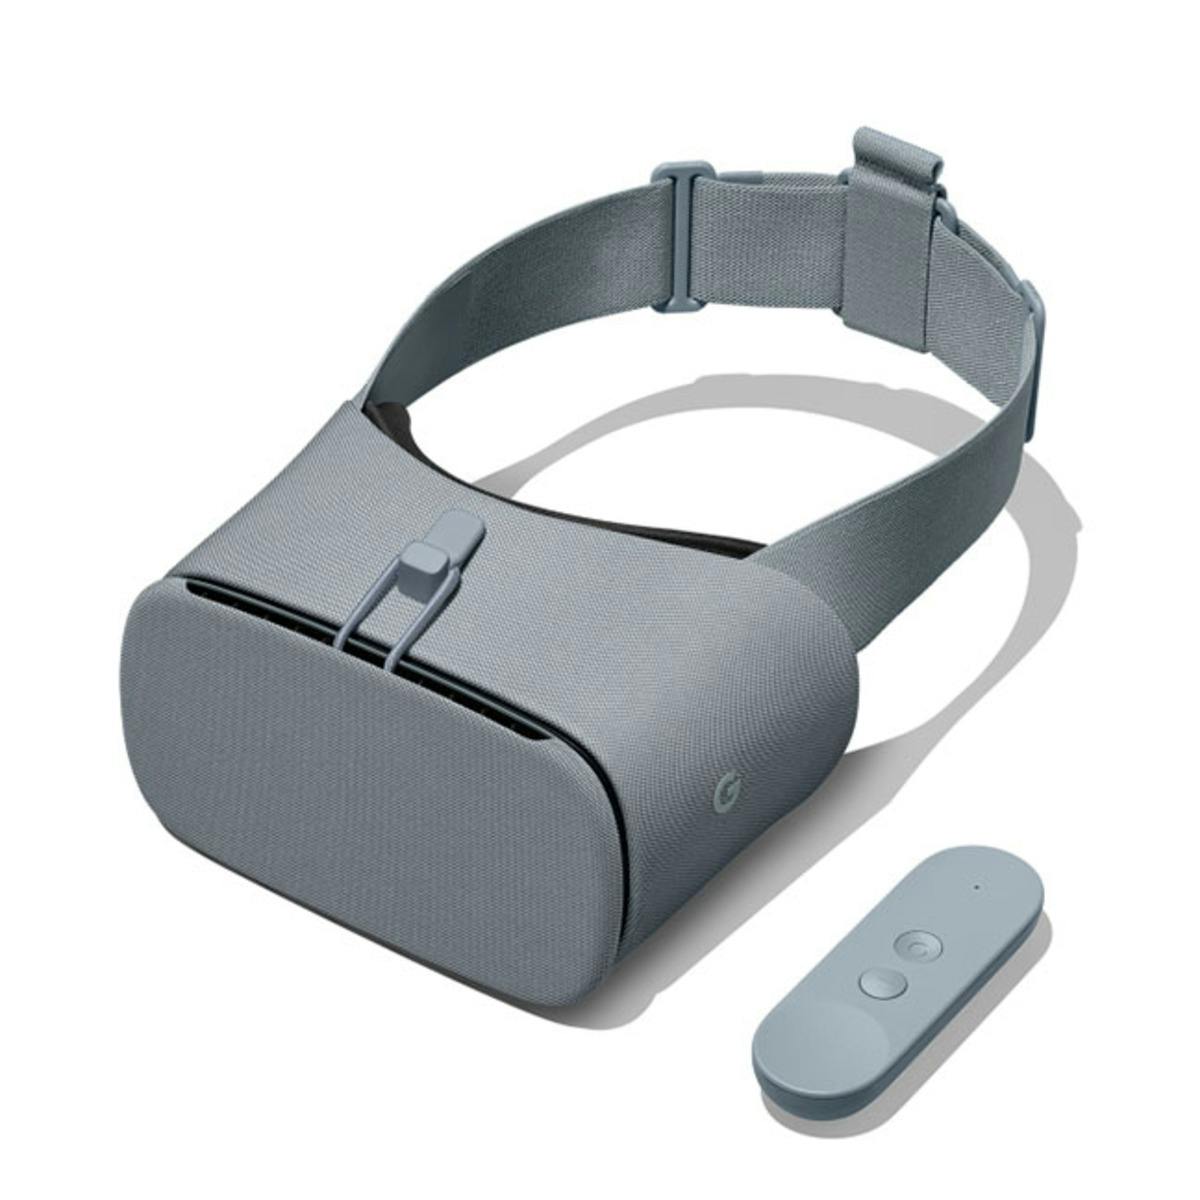 Daydream vr. Daydream view - 2017. Шлем виртуальной реальности Ehang GHOSTDRONE 2.0 VR Goggles for IOS. Google Daydream.